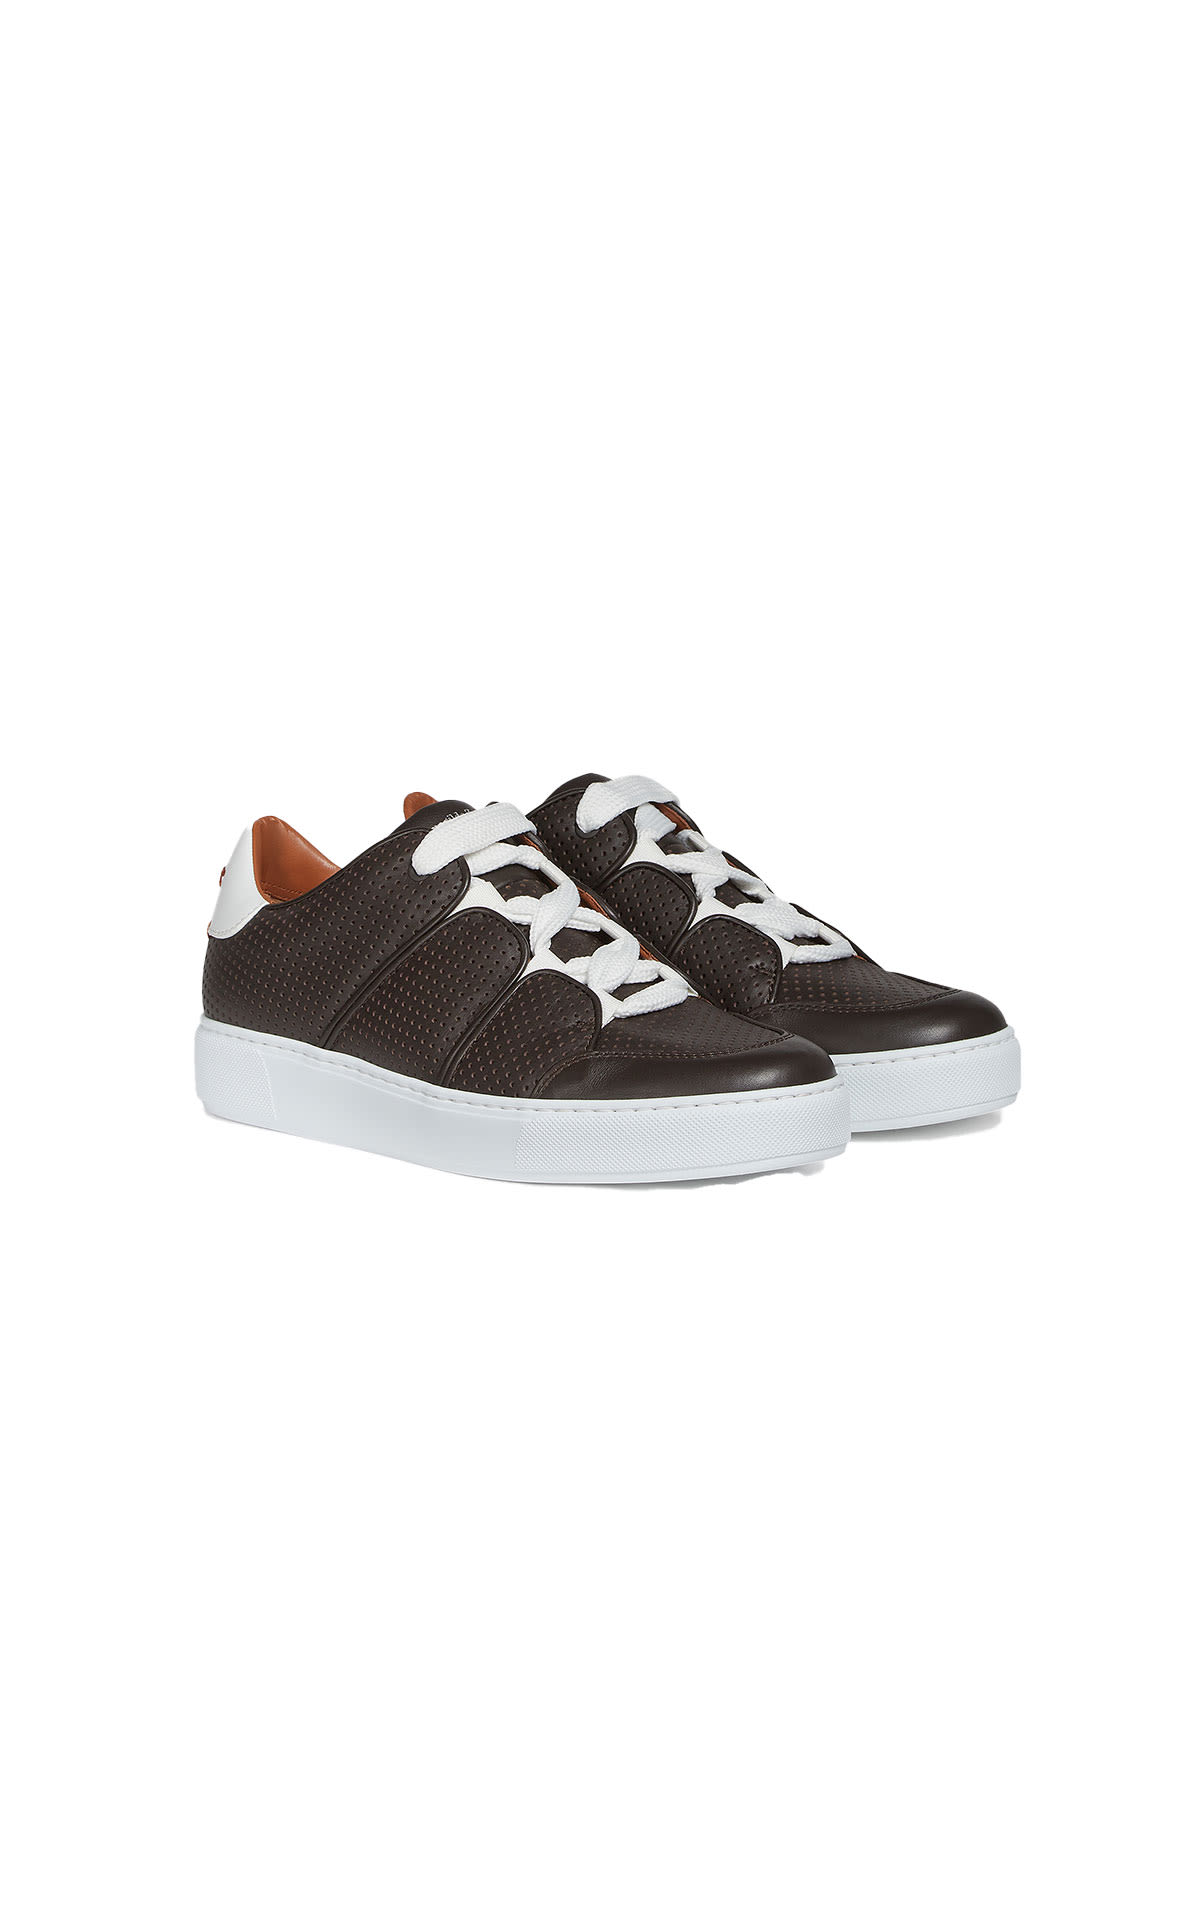 Zegna XXX  sneakers from Bicester Village